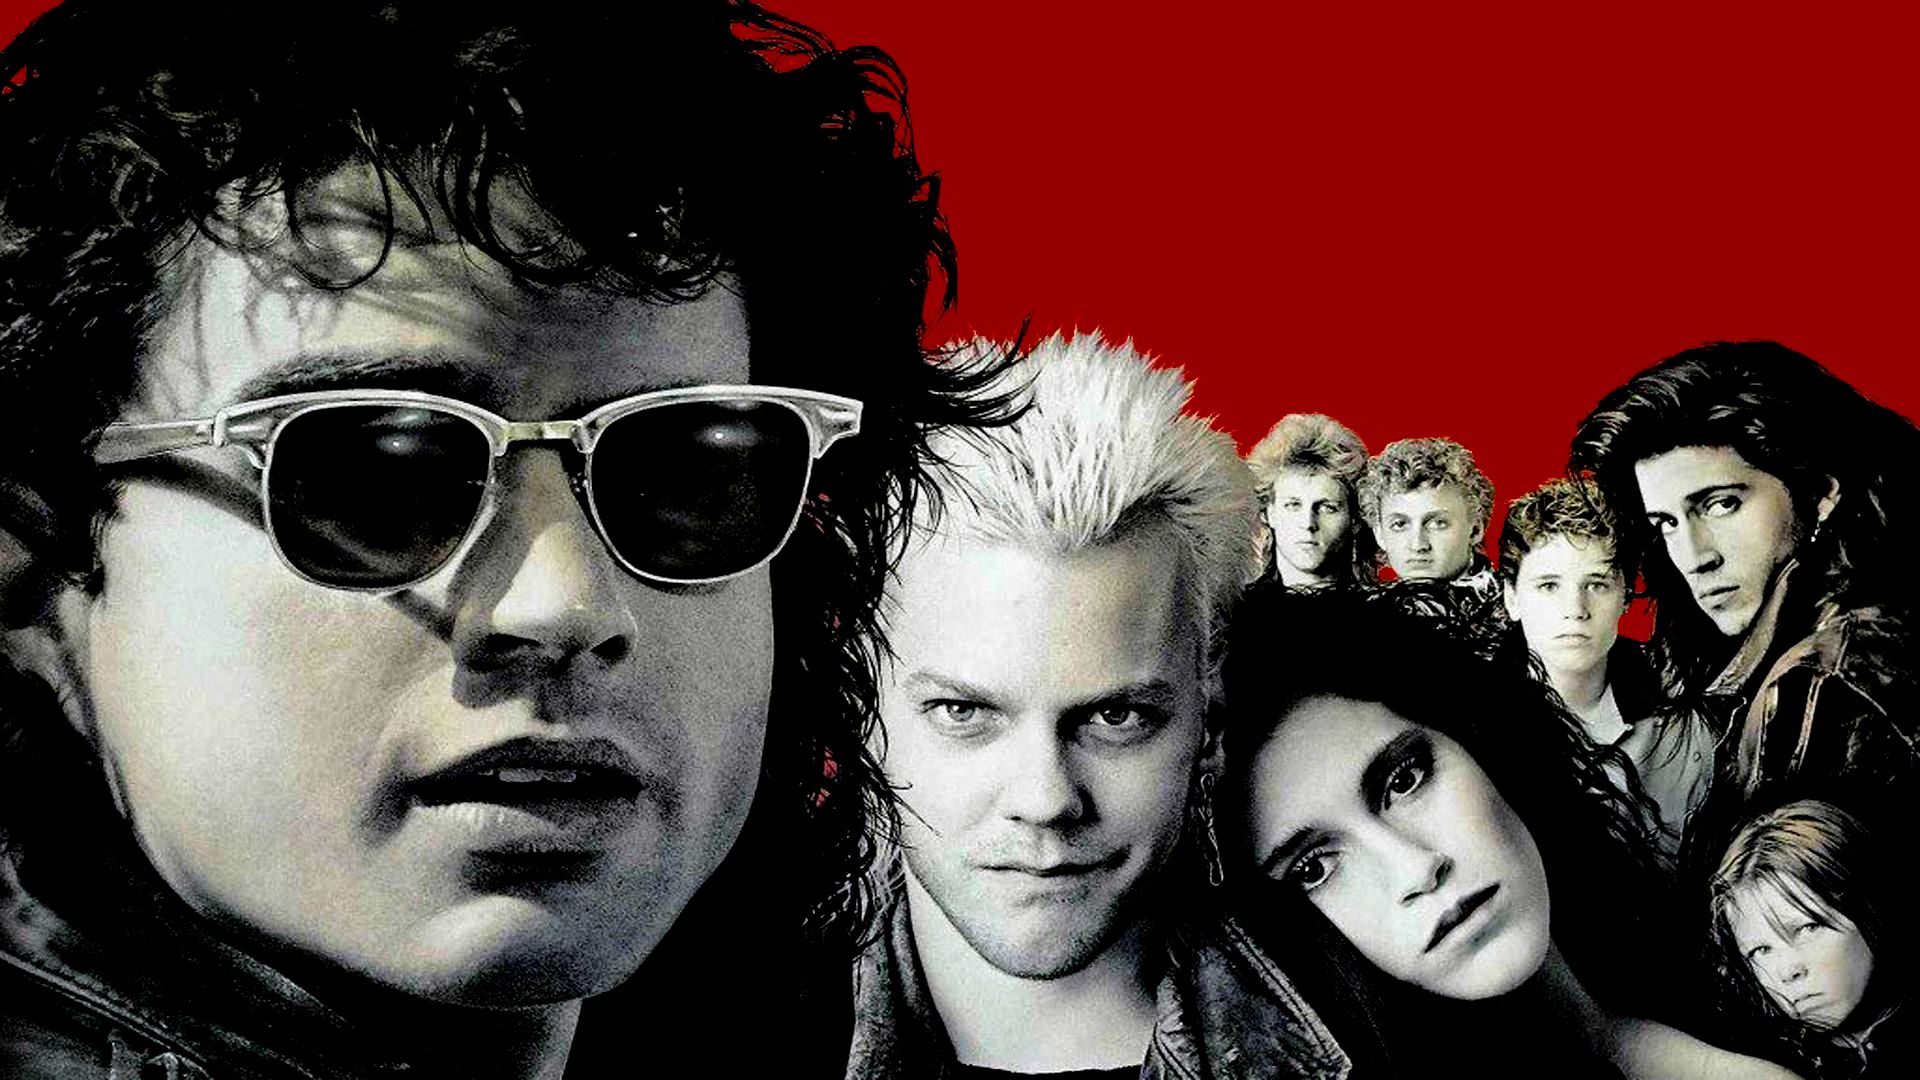 The Lost Boys background